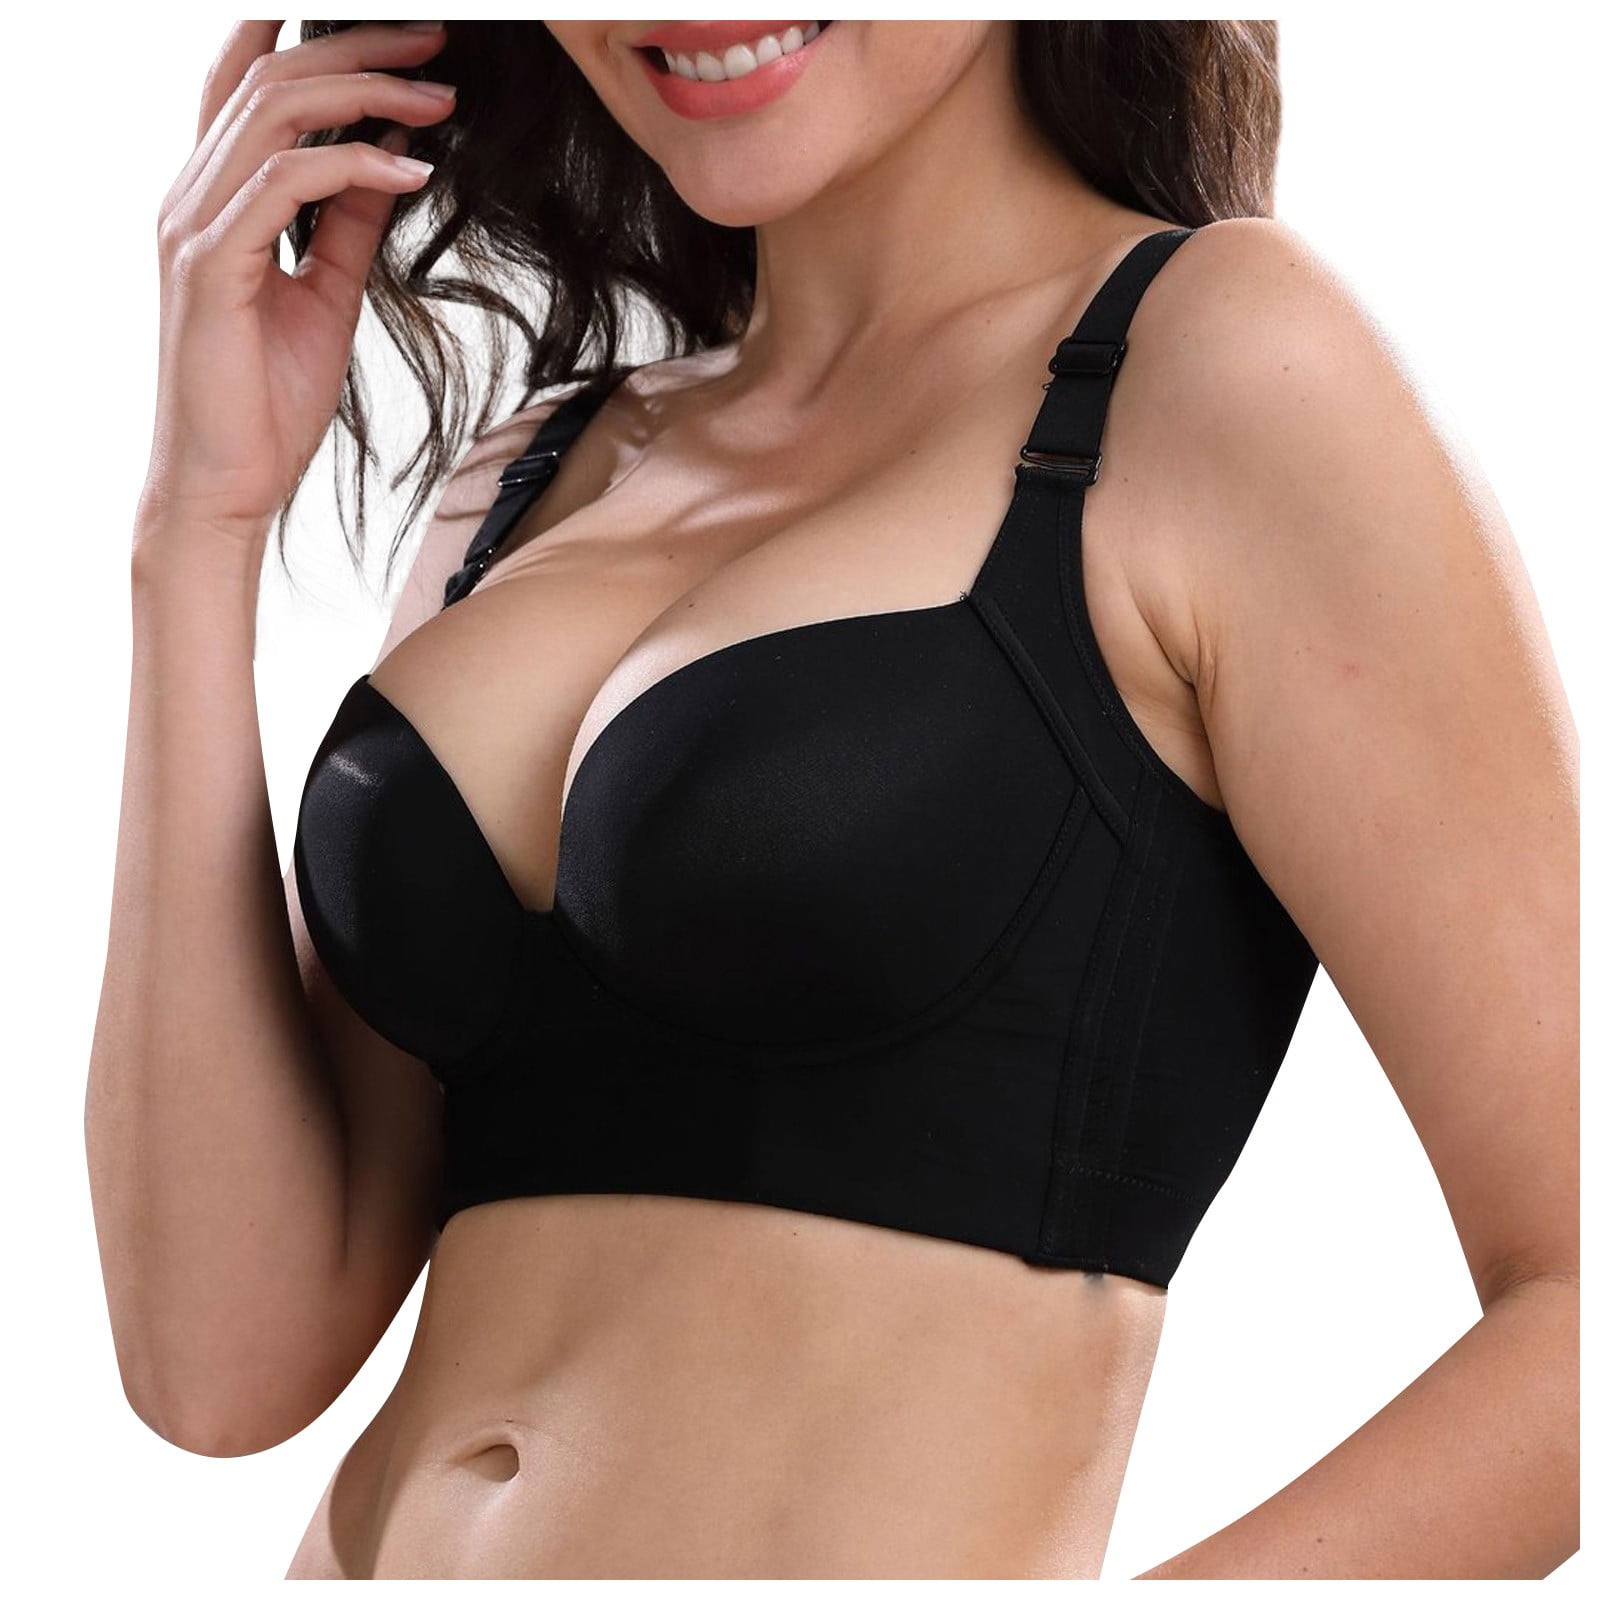 TQWQT Push Up Bras for Women Padded Deep V Soft Cup Everyday Bra